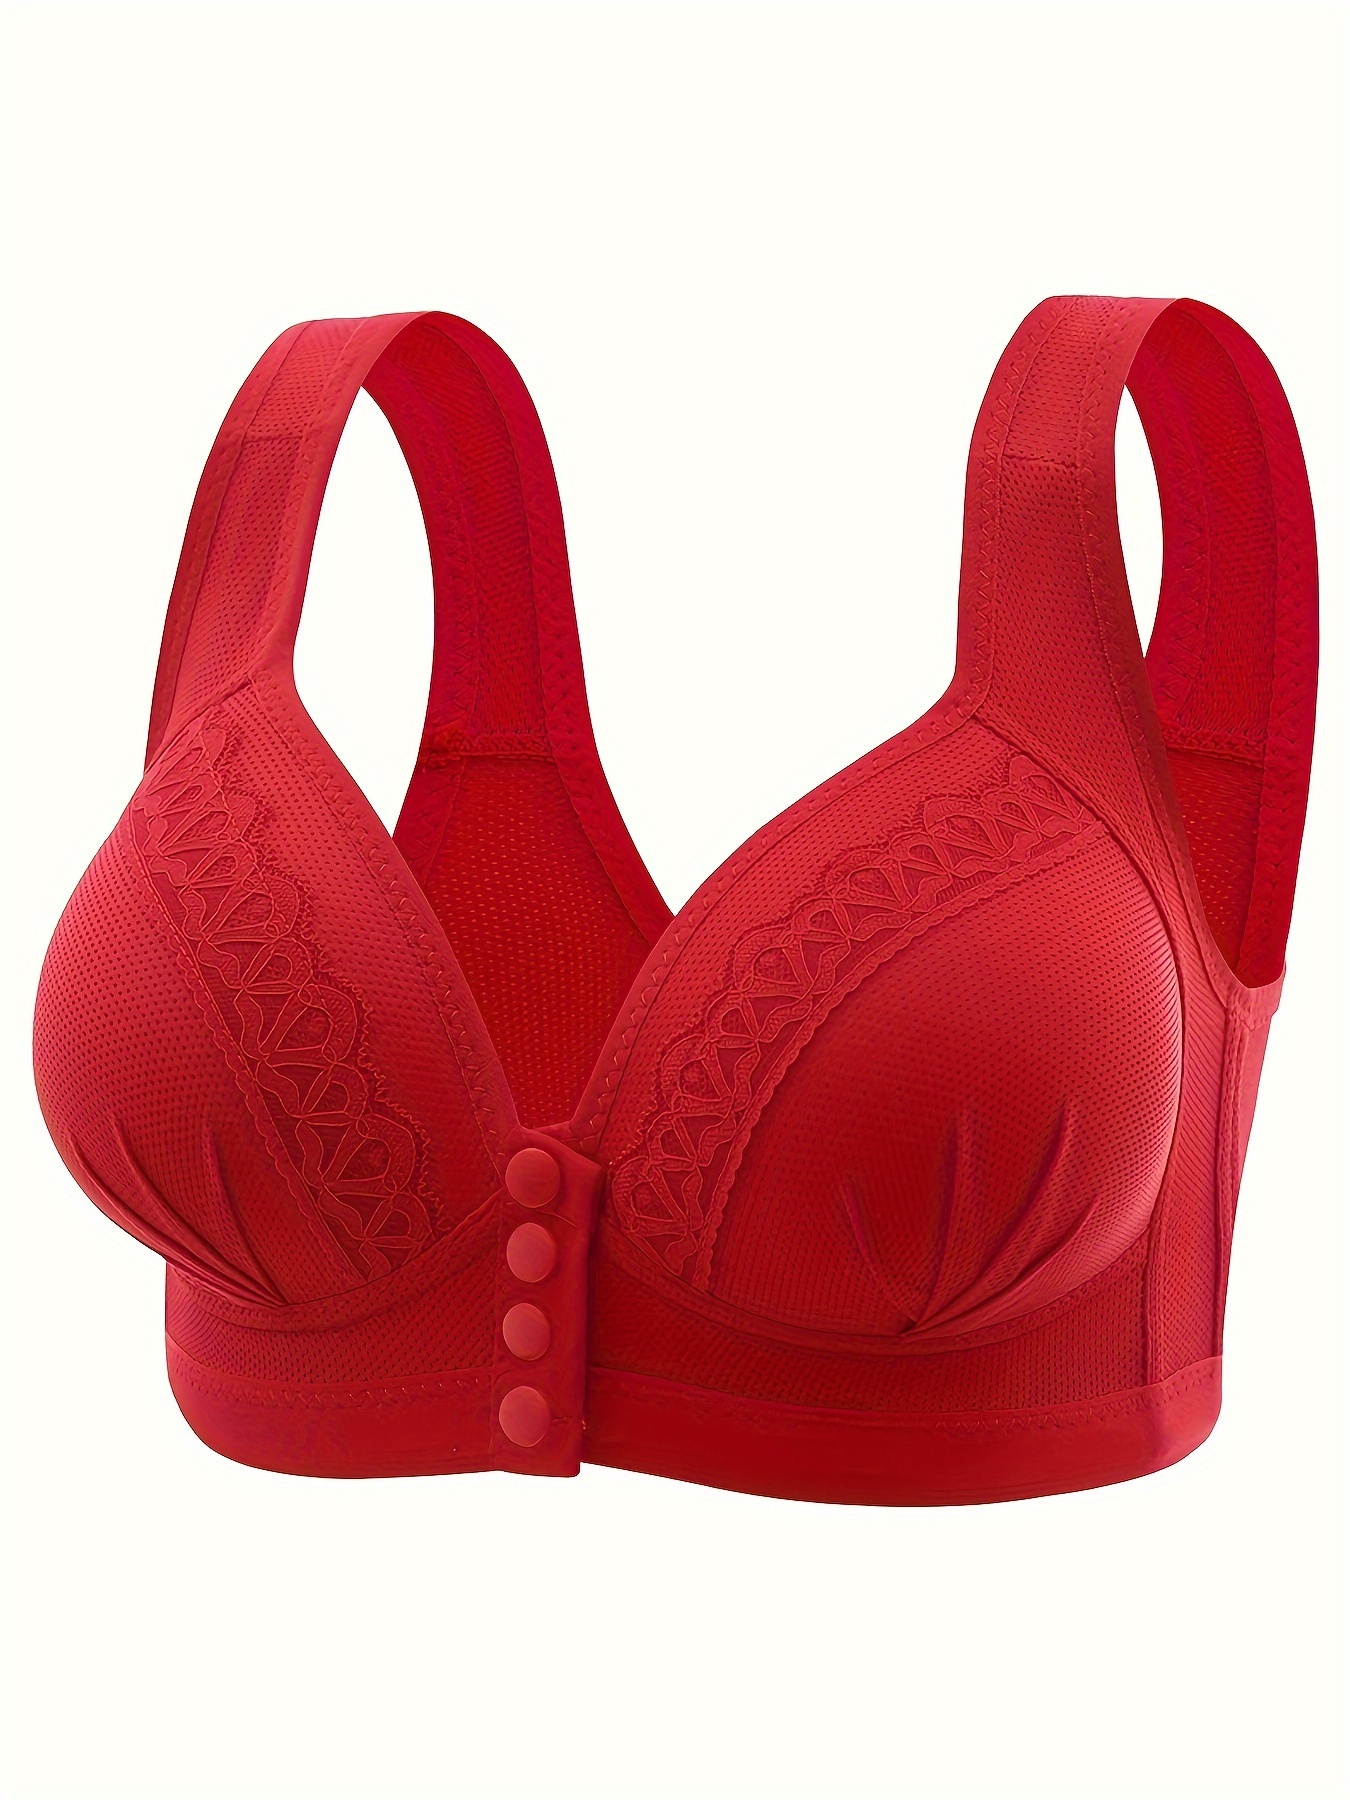 Bras for Women No Underwire Full Coverage Front Closure Push Up